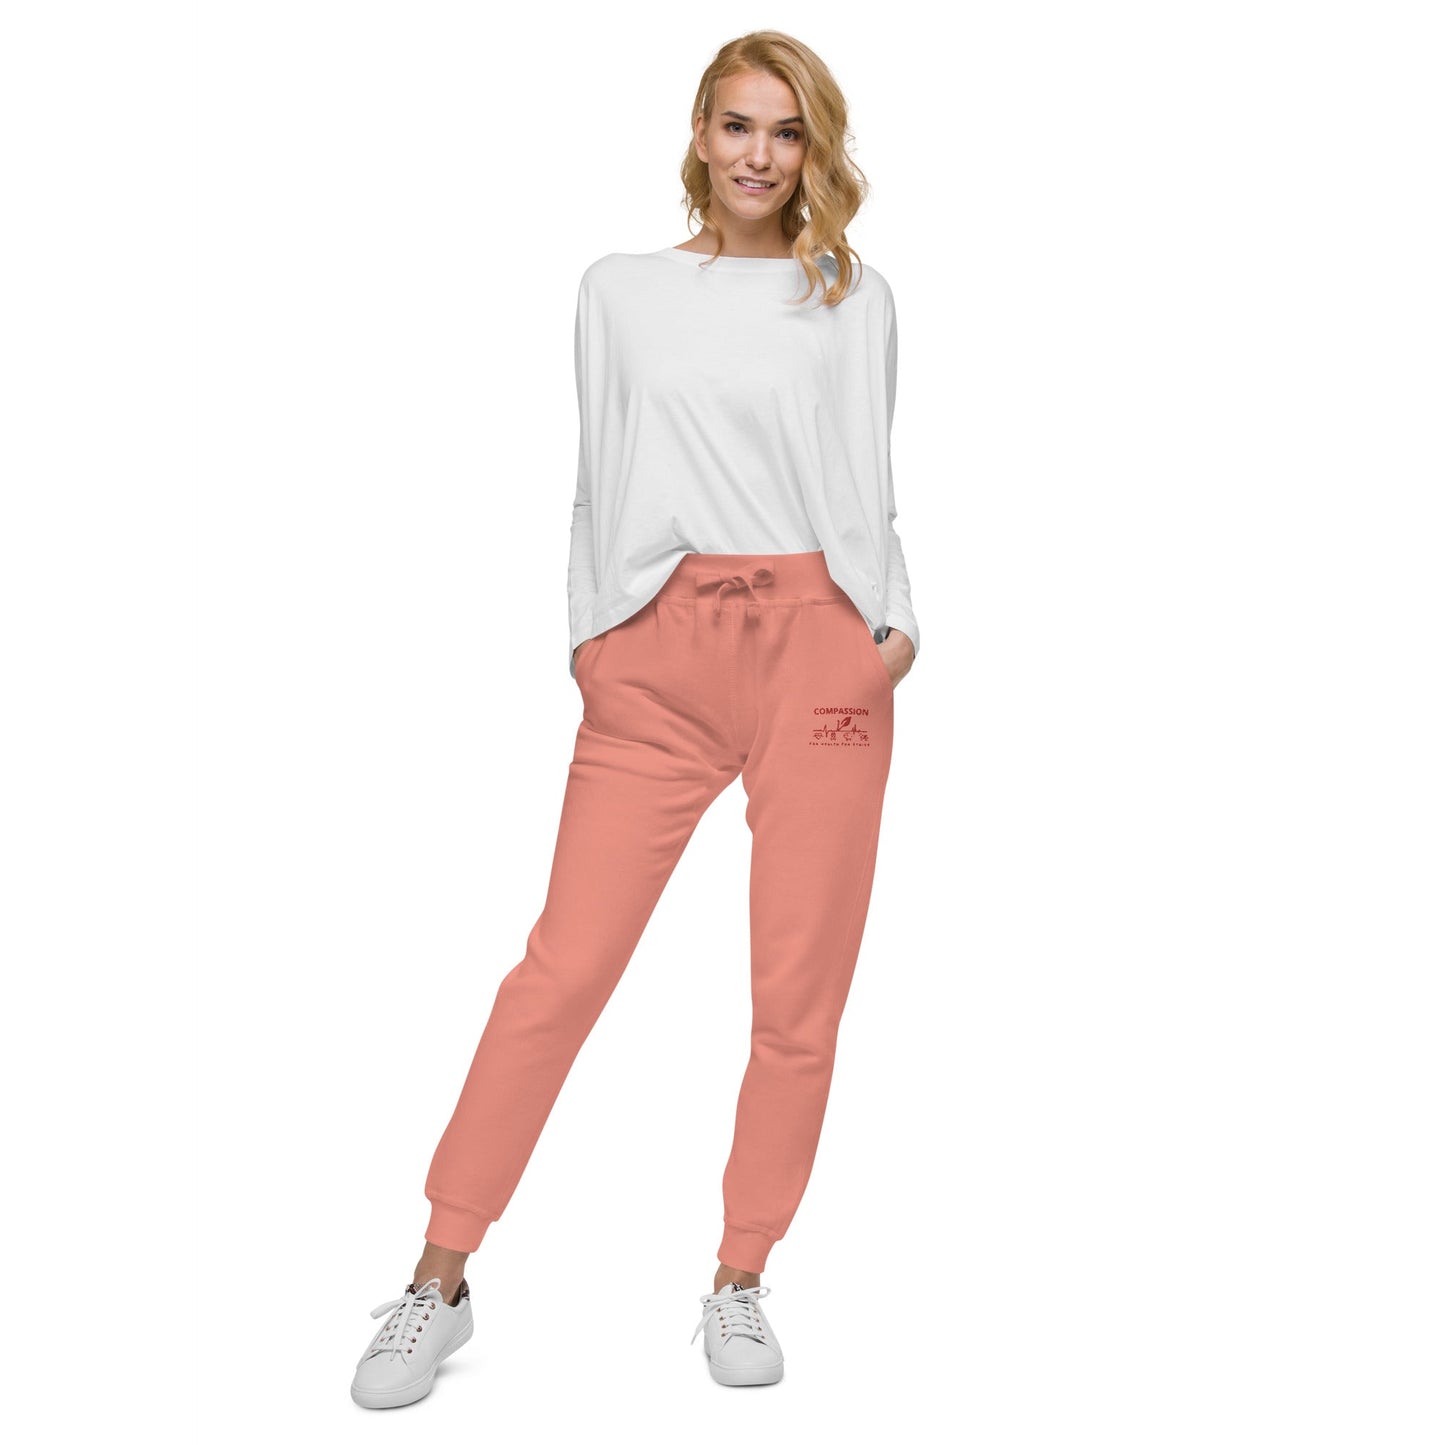 Compassion Fleece sweatpants - For Health For Ethics - Dusty Rose